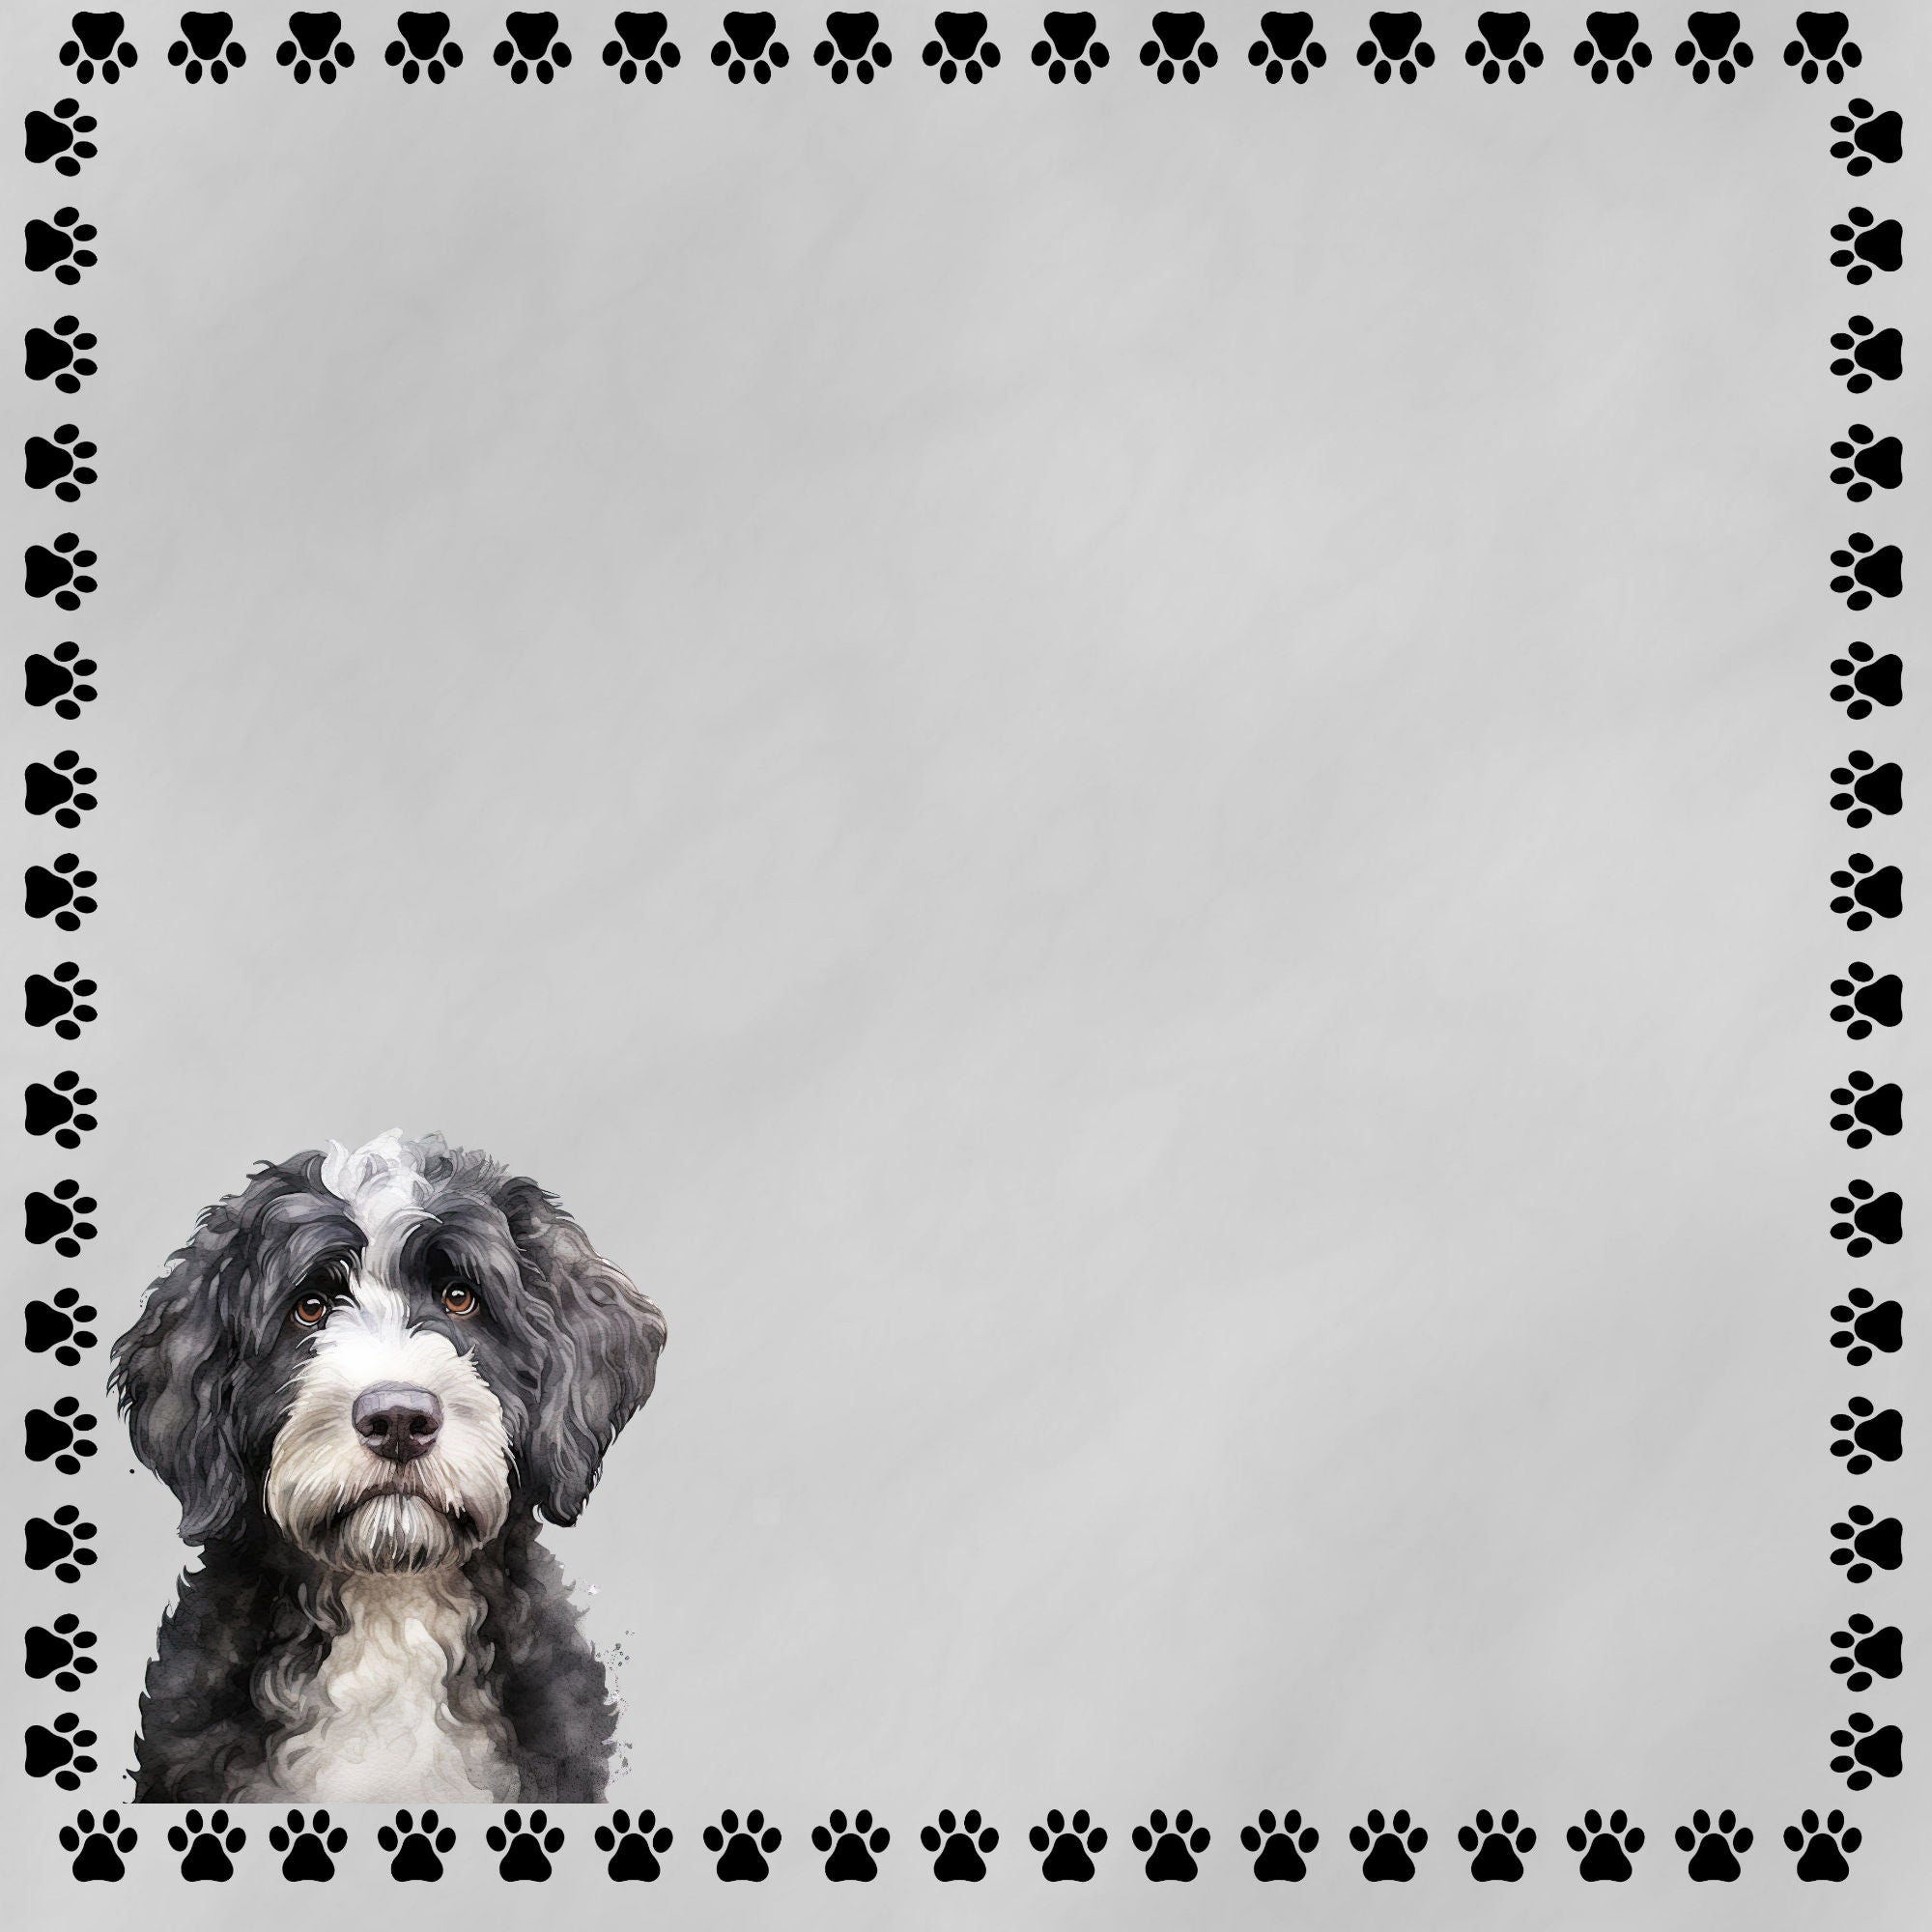 Dog Breeds Collection Bernedoodle 12 x 12 Double-Sided Scrapbook Paper by SSC Designs